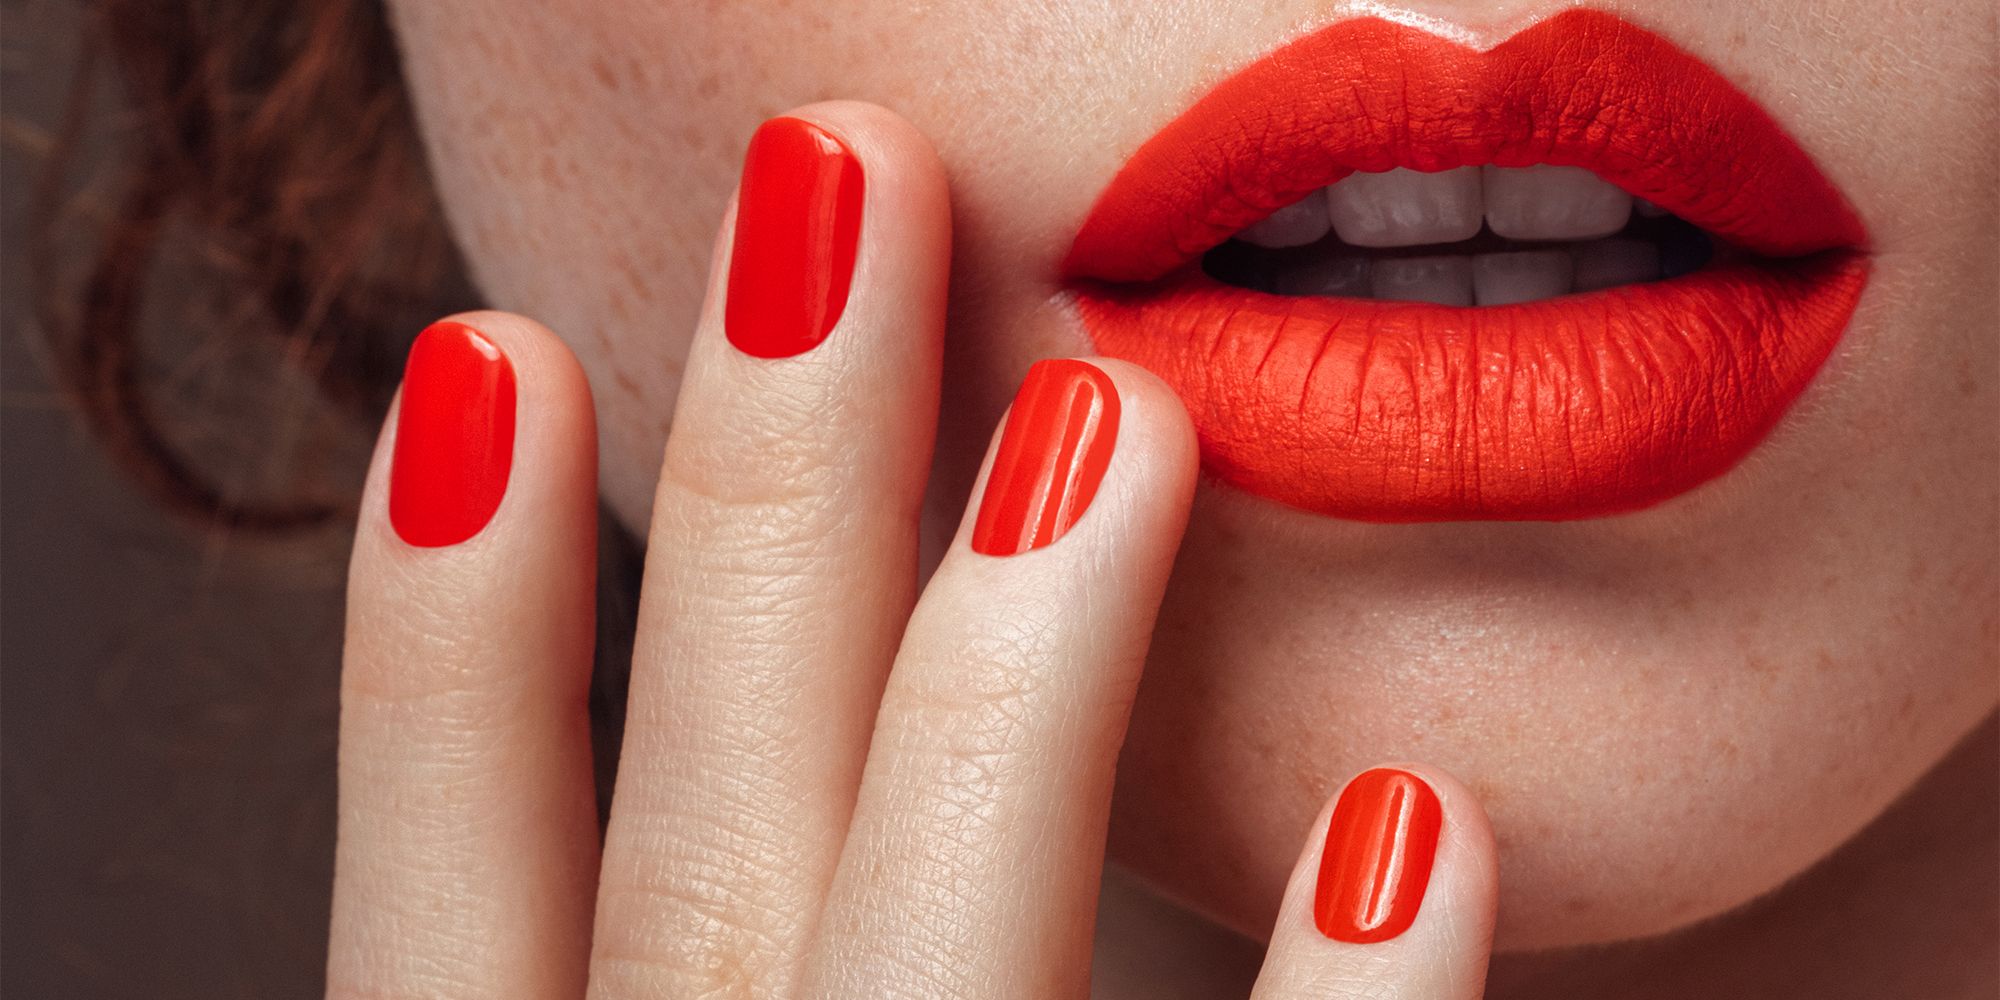 What Are Shellac Nails: Shellac Nails vs Manicure